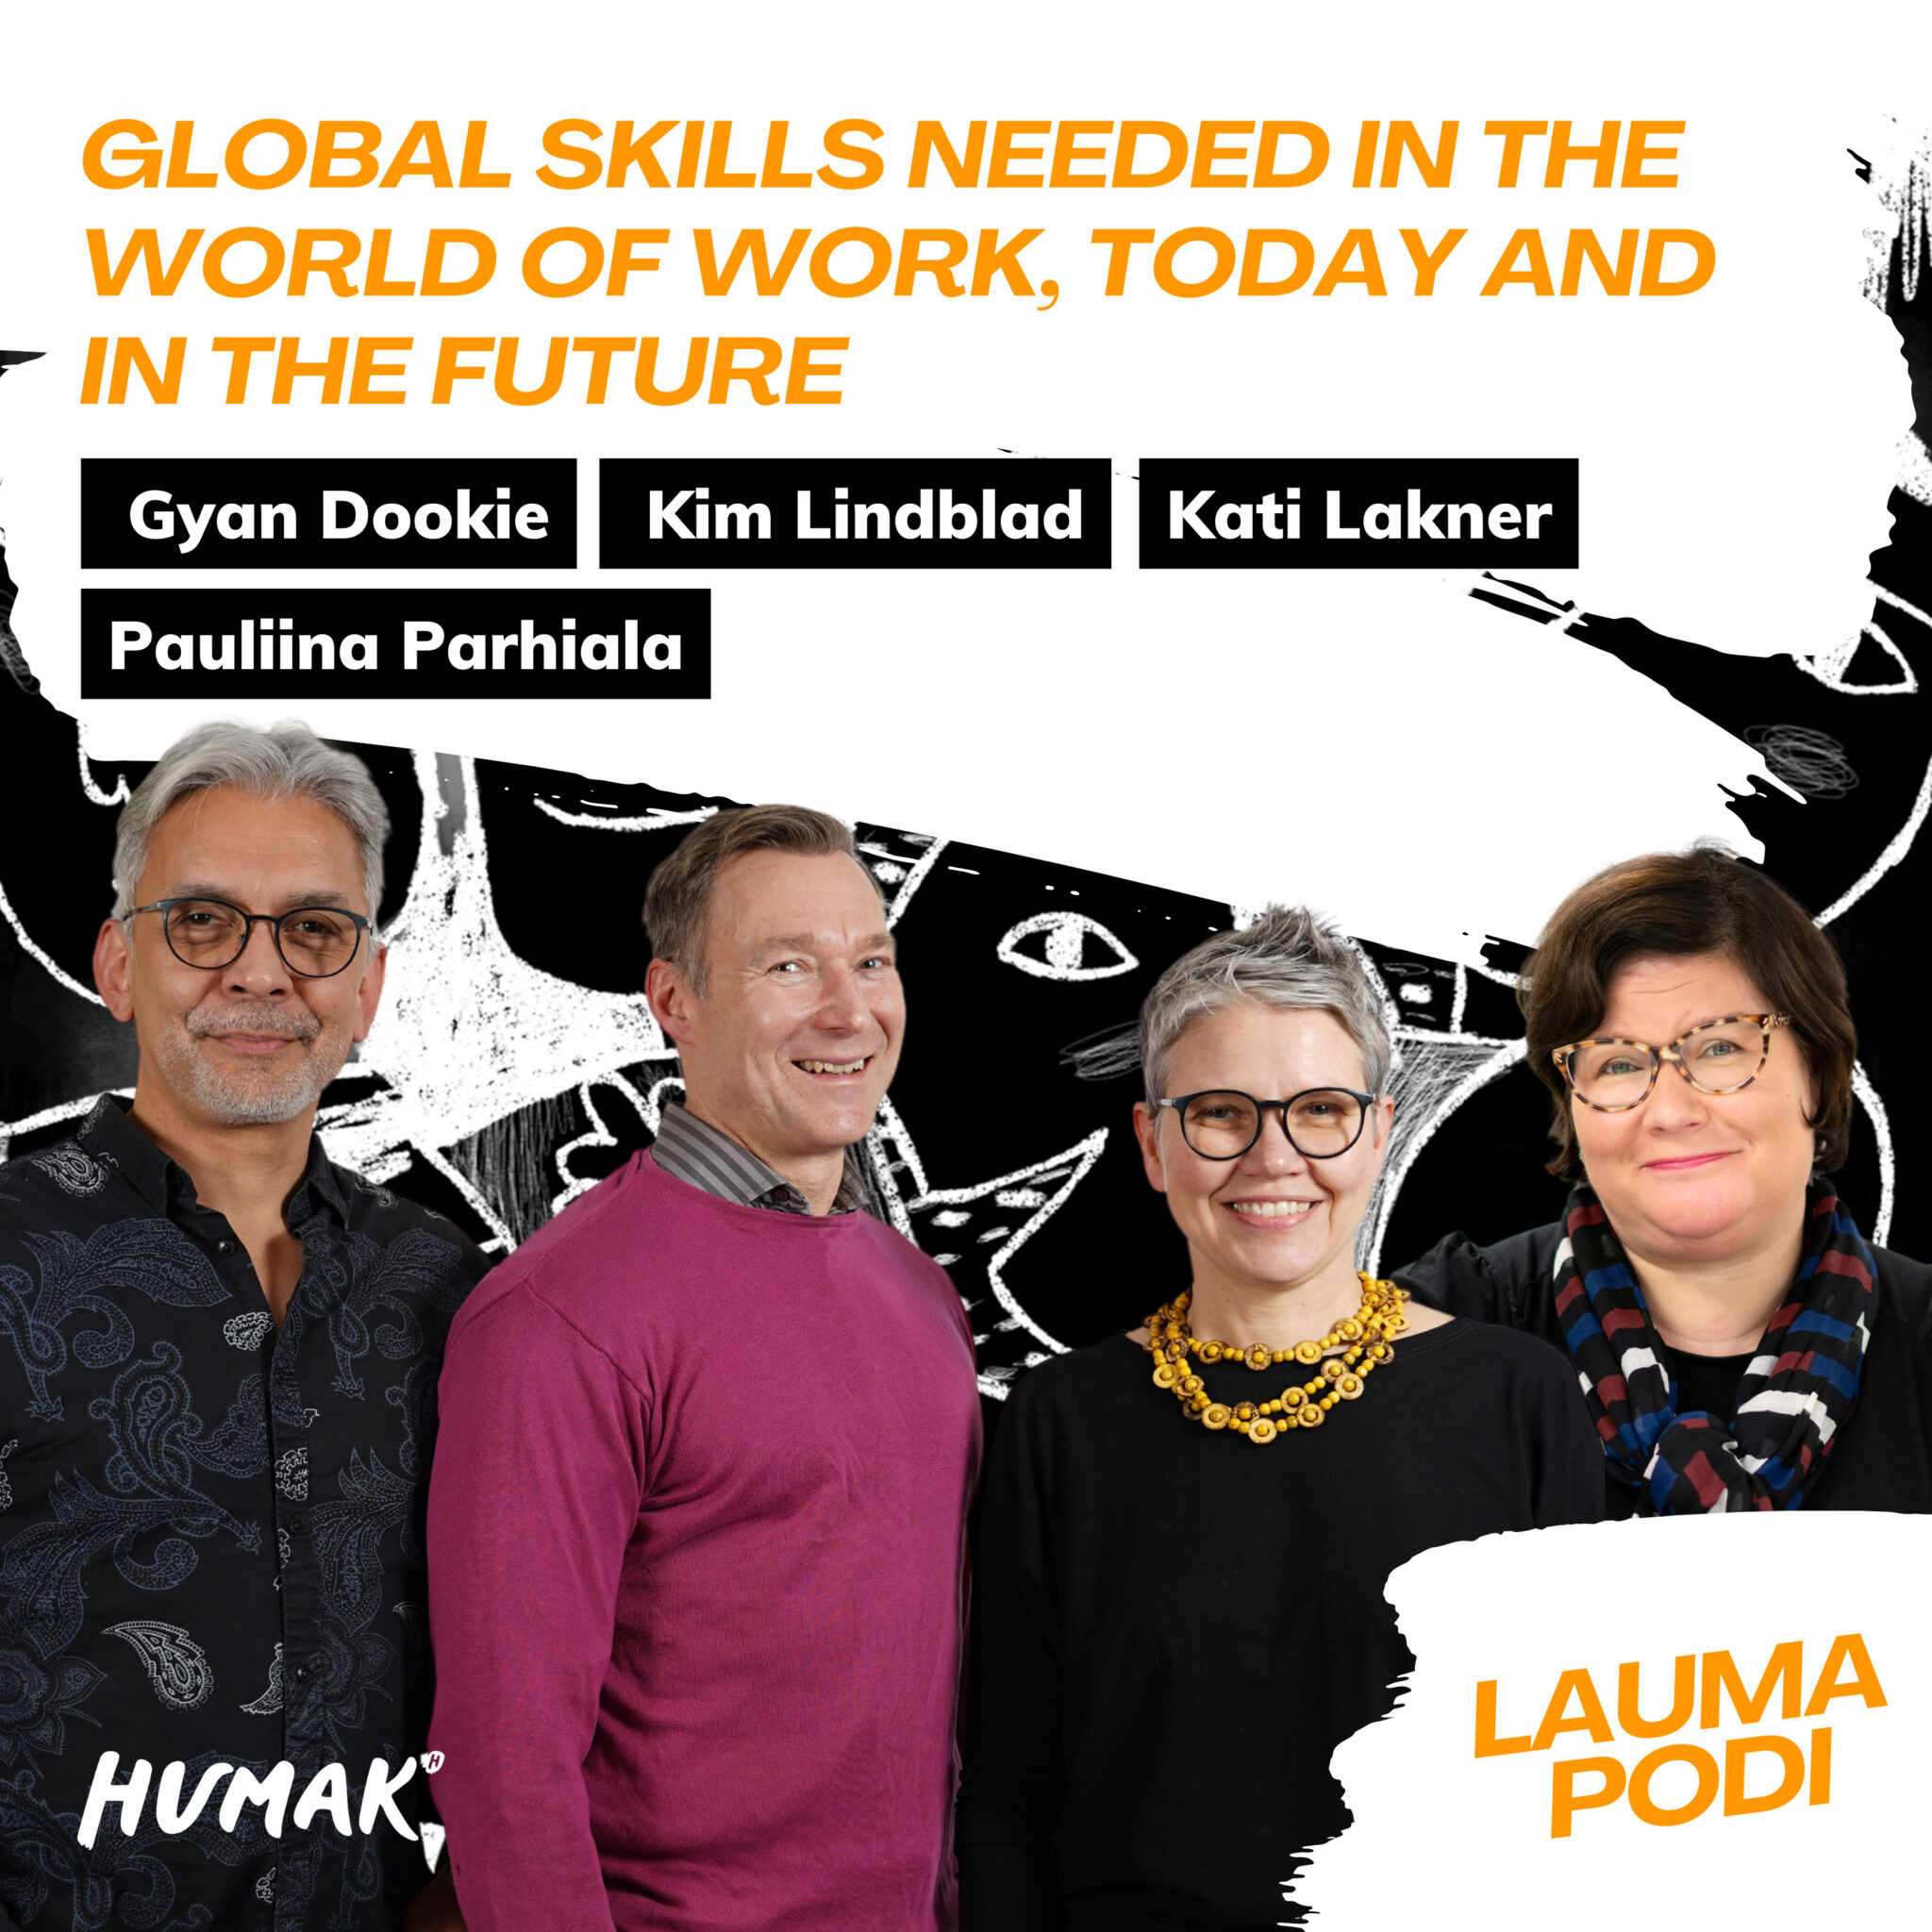 Laumapodi: Global skills needed in the world of work, today and in the future